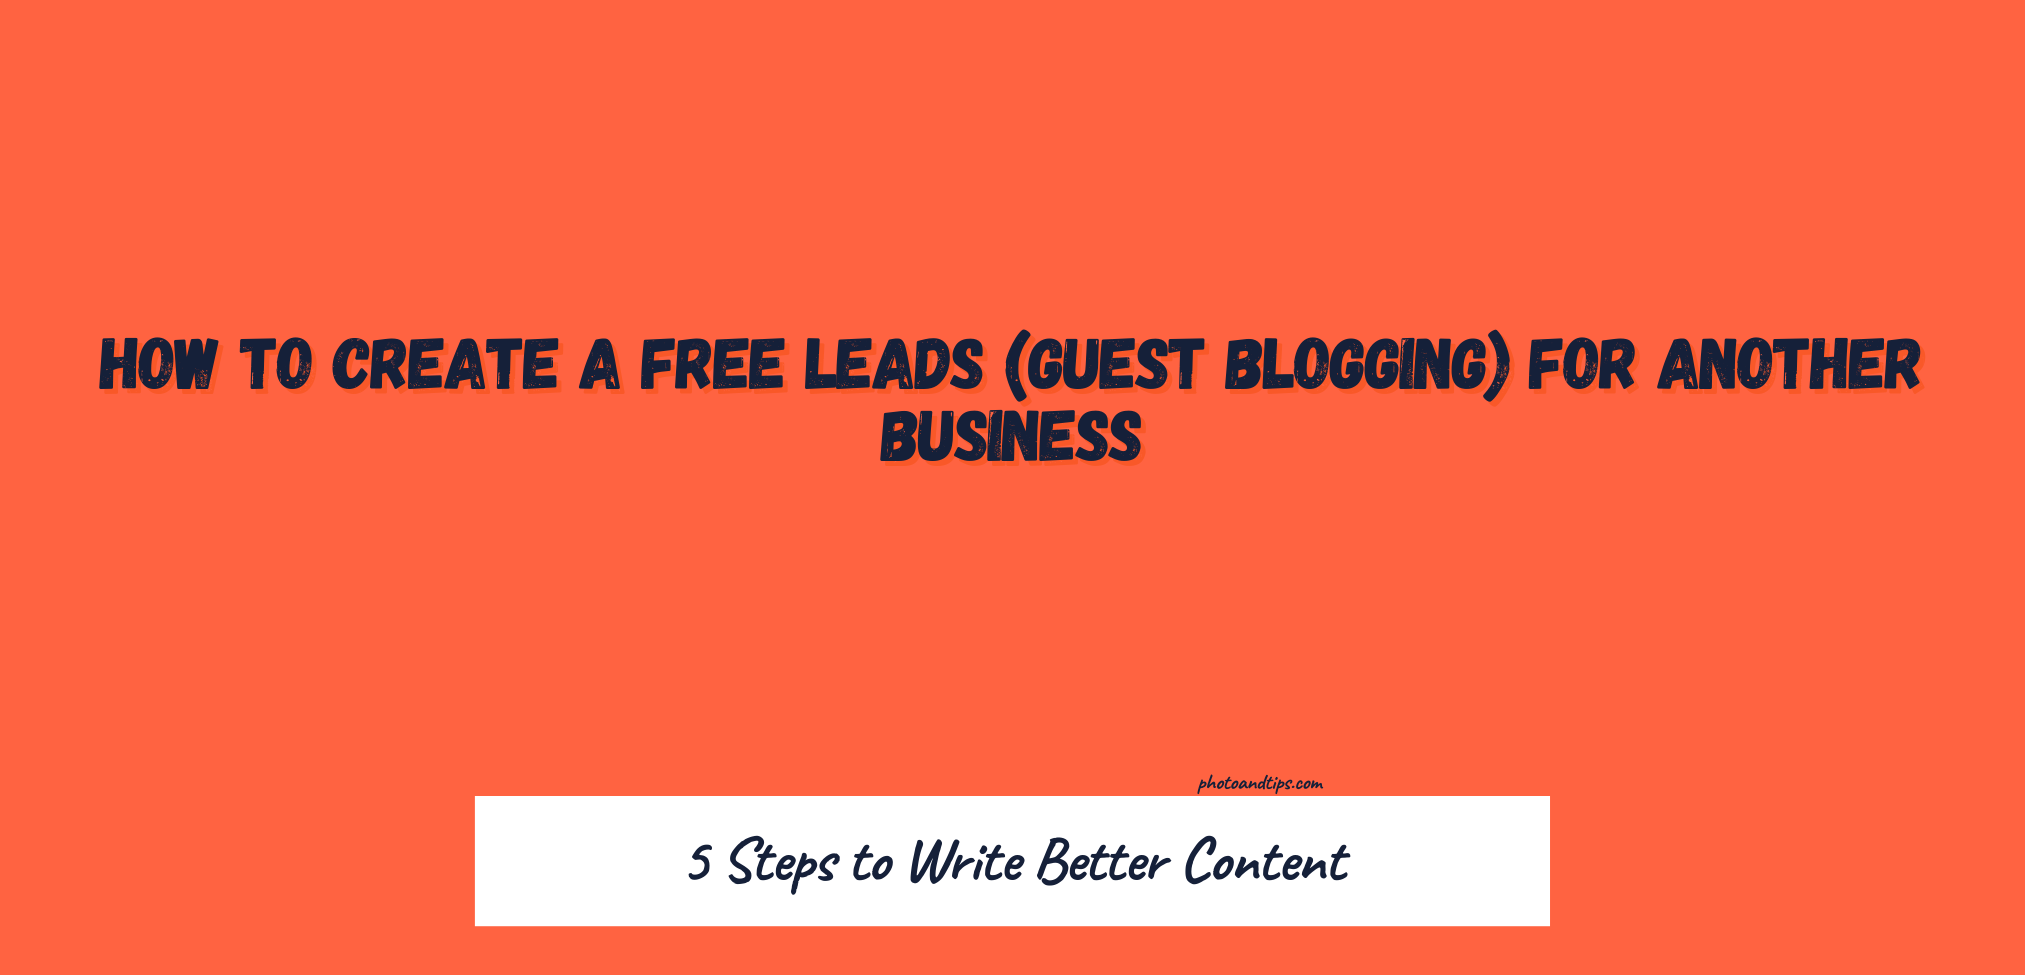 How to Create Free Leads (Guest Blogging) For Another Business